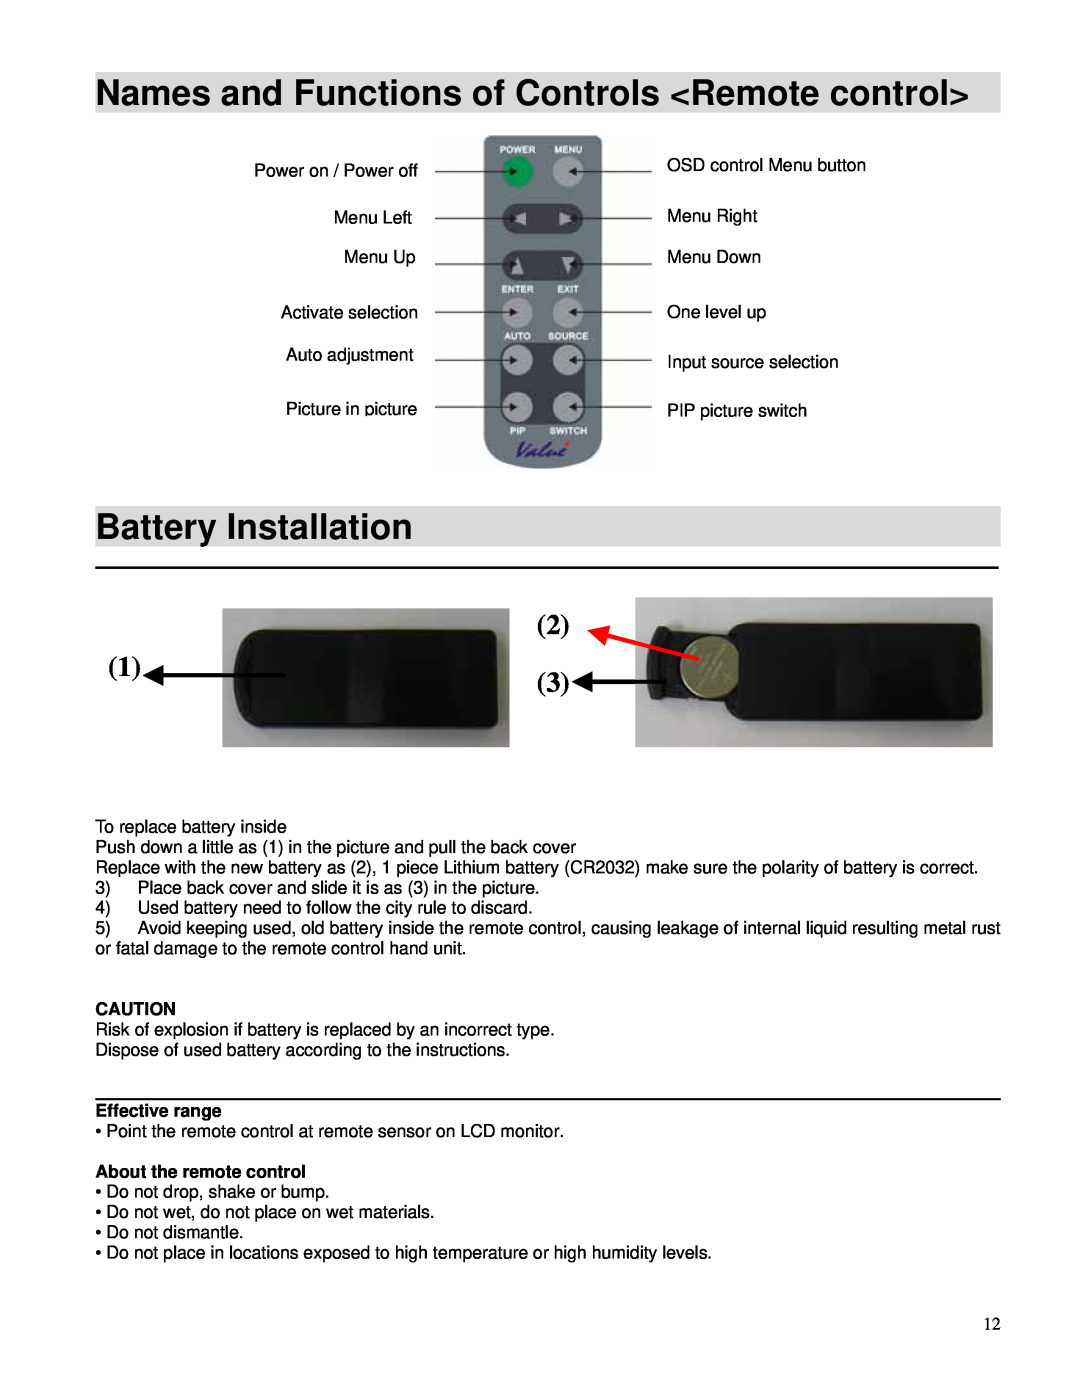 Toshiba P42LHA owner manual Names and Functions of Controls Remote control, Battery Installation, Effective range 